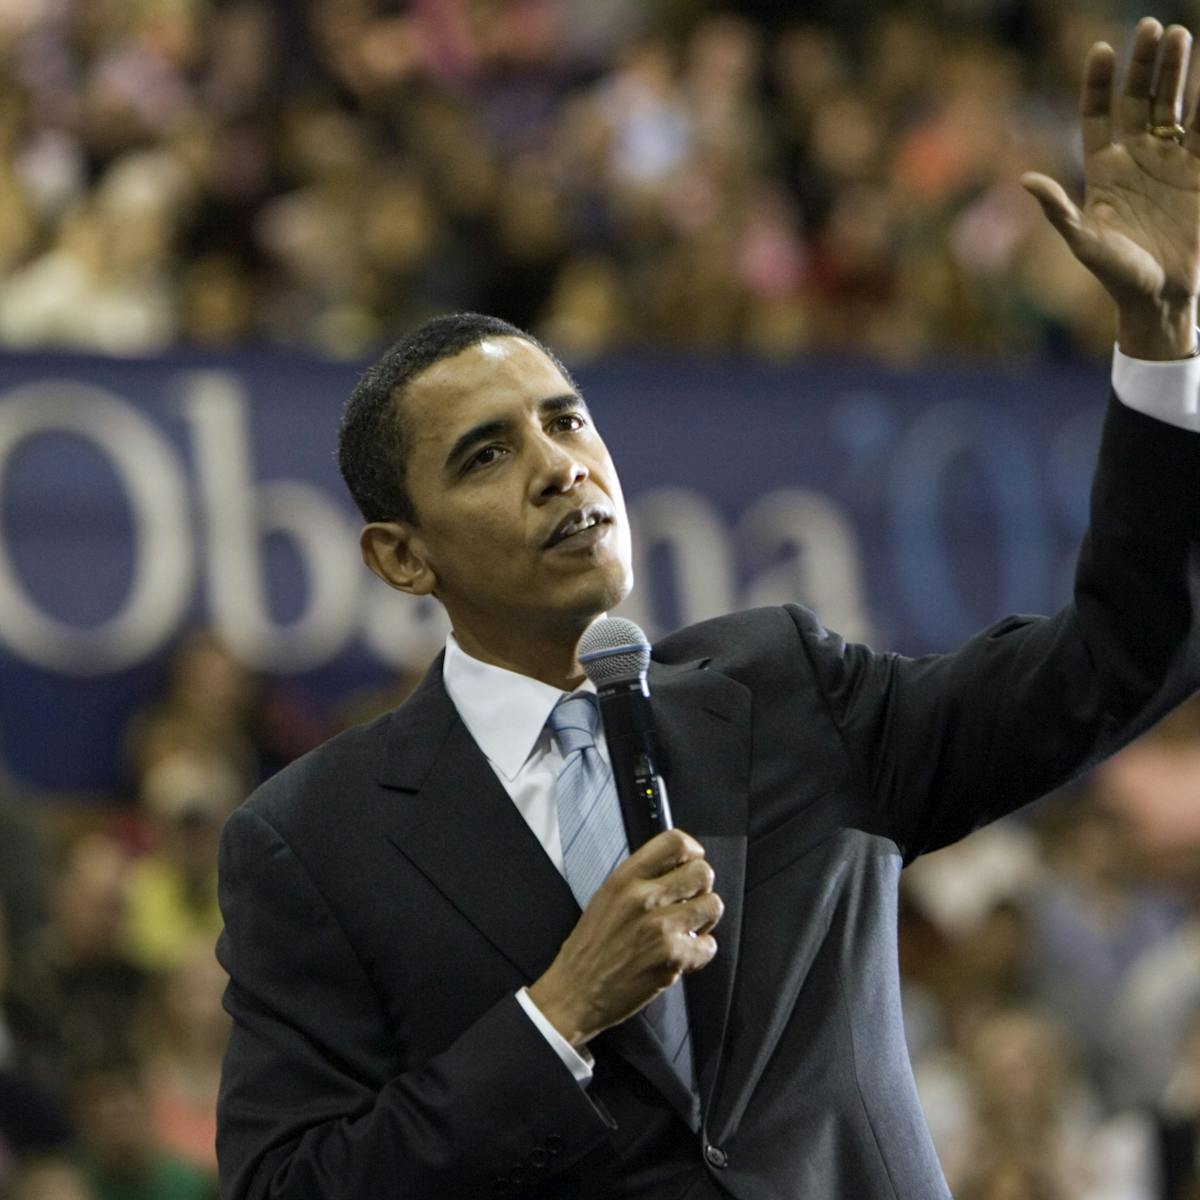 How Obama's presidential campaign changed how Americans view black  candidates